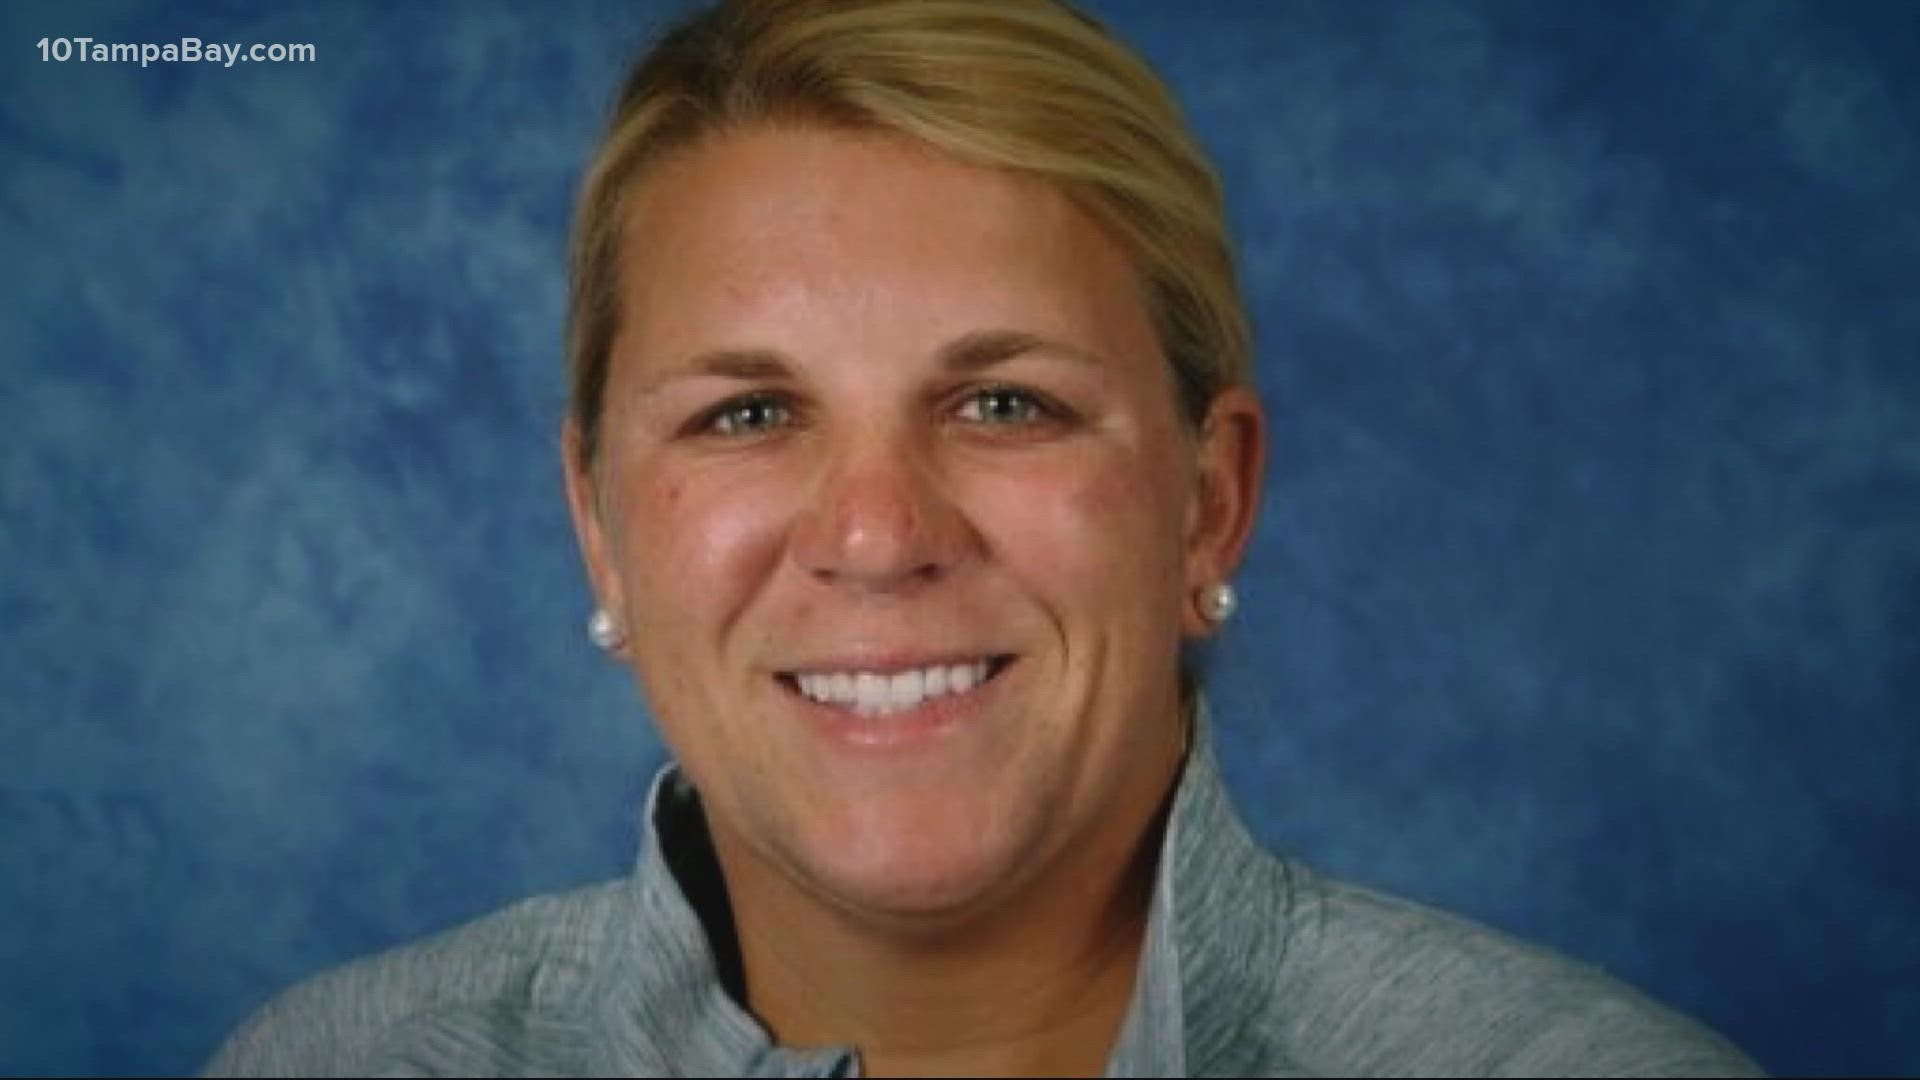 Ciara McKeon was a physical education teacher and tennis coach at the high school for two years.